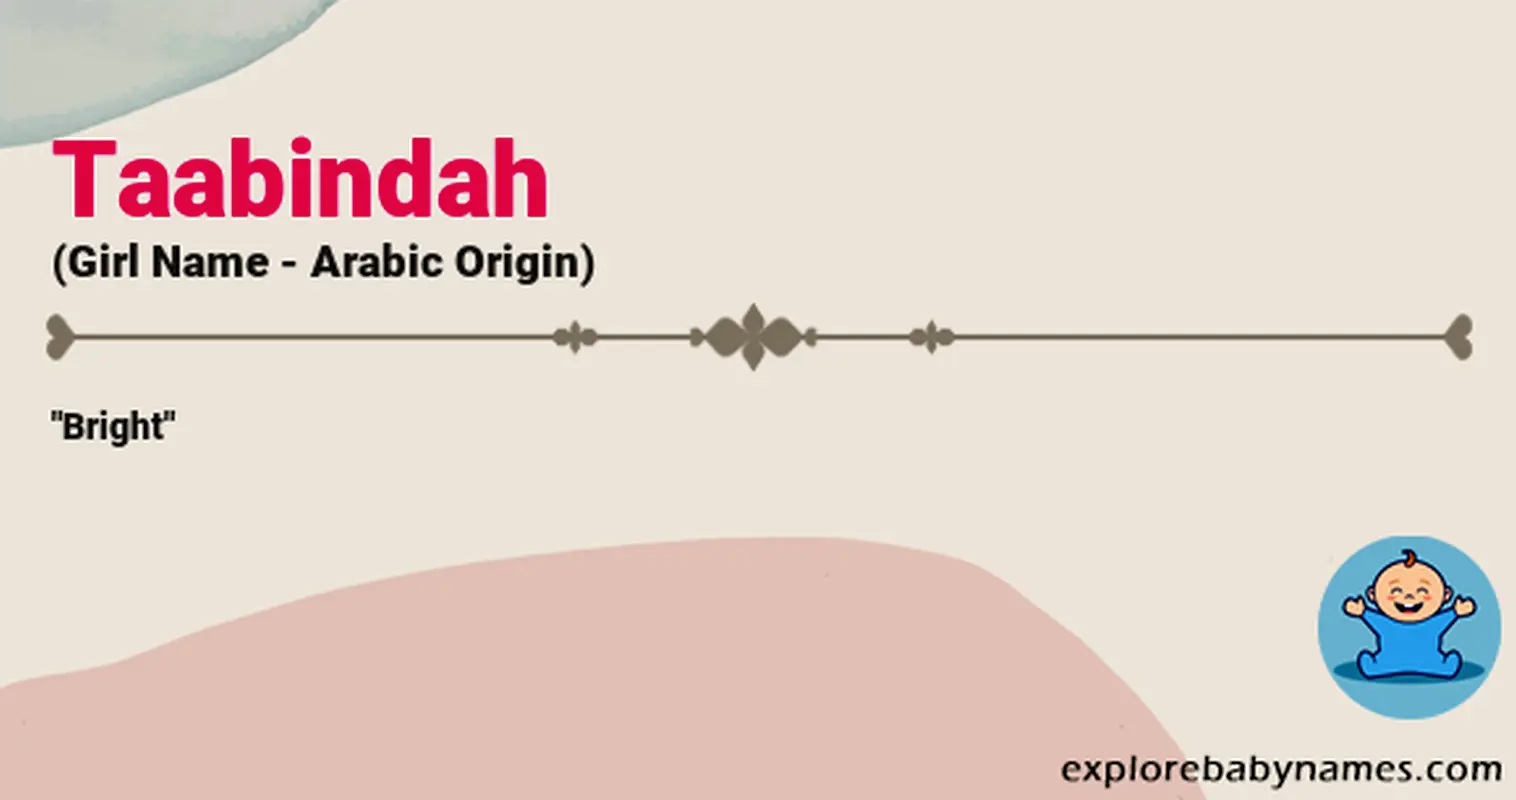 Meaning of Taabindah